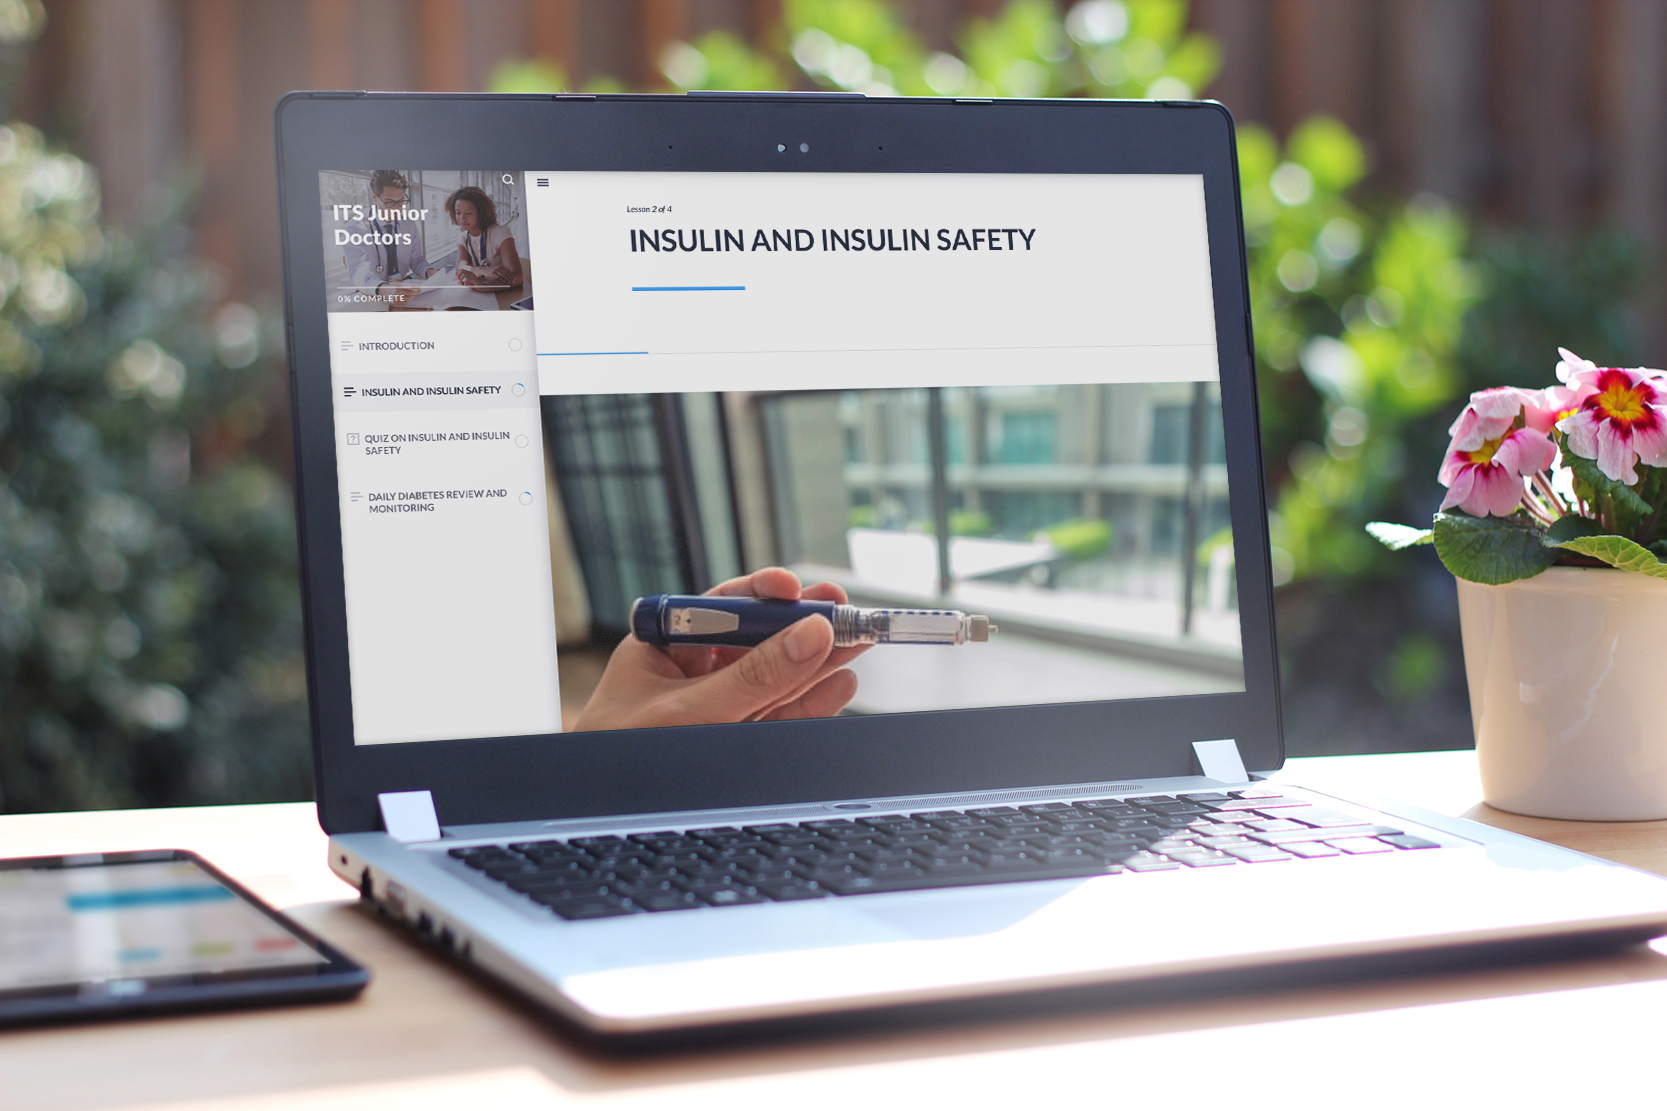 Access our Insulin Safety course